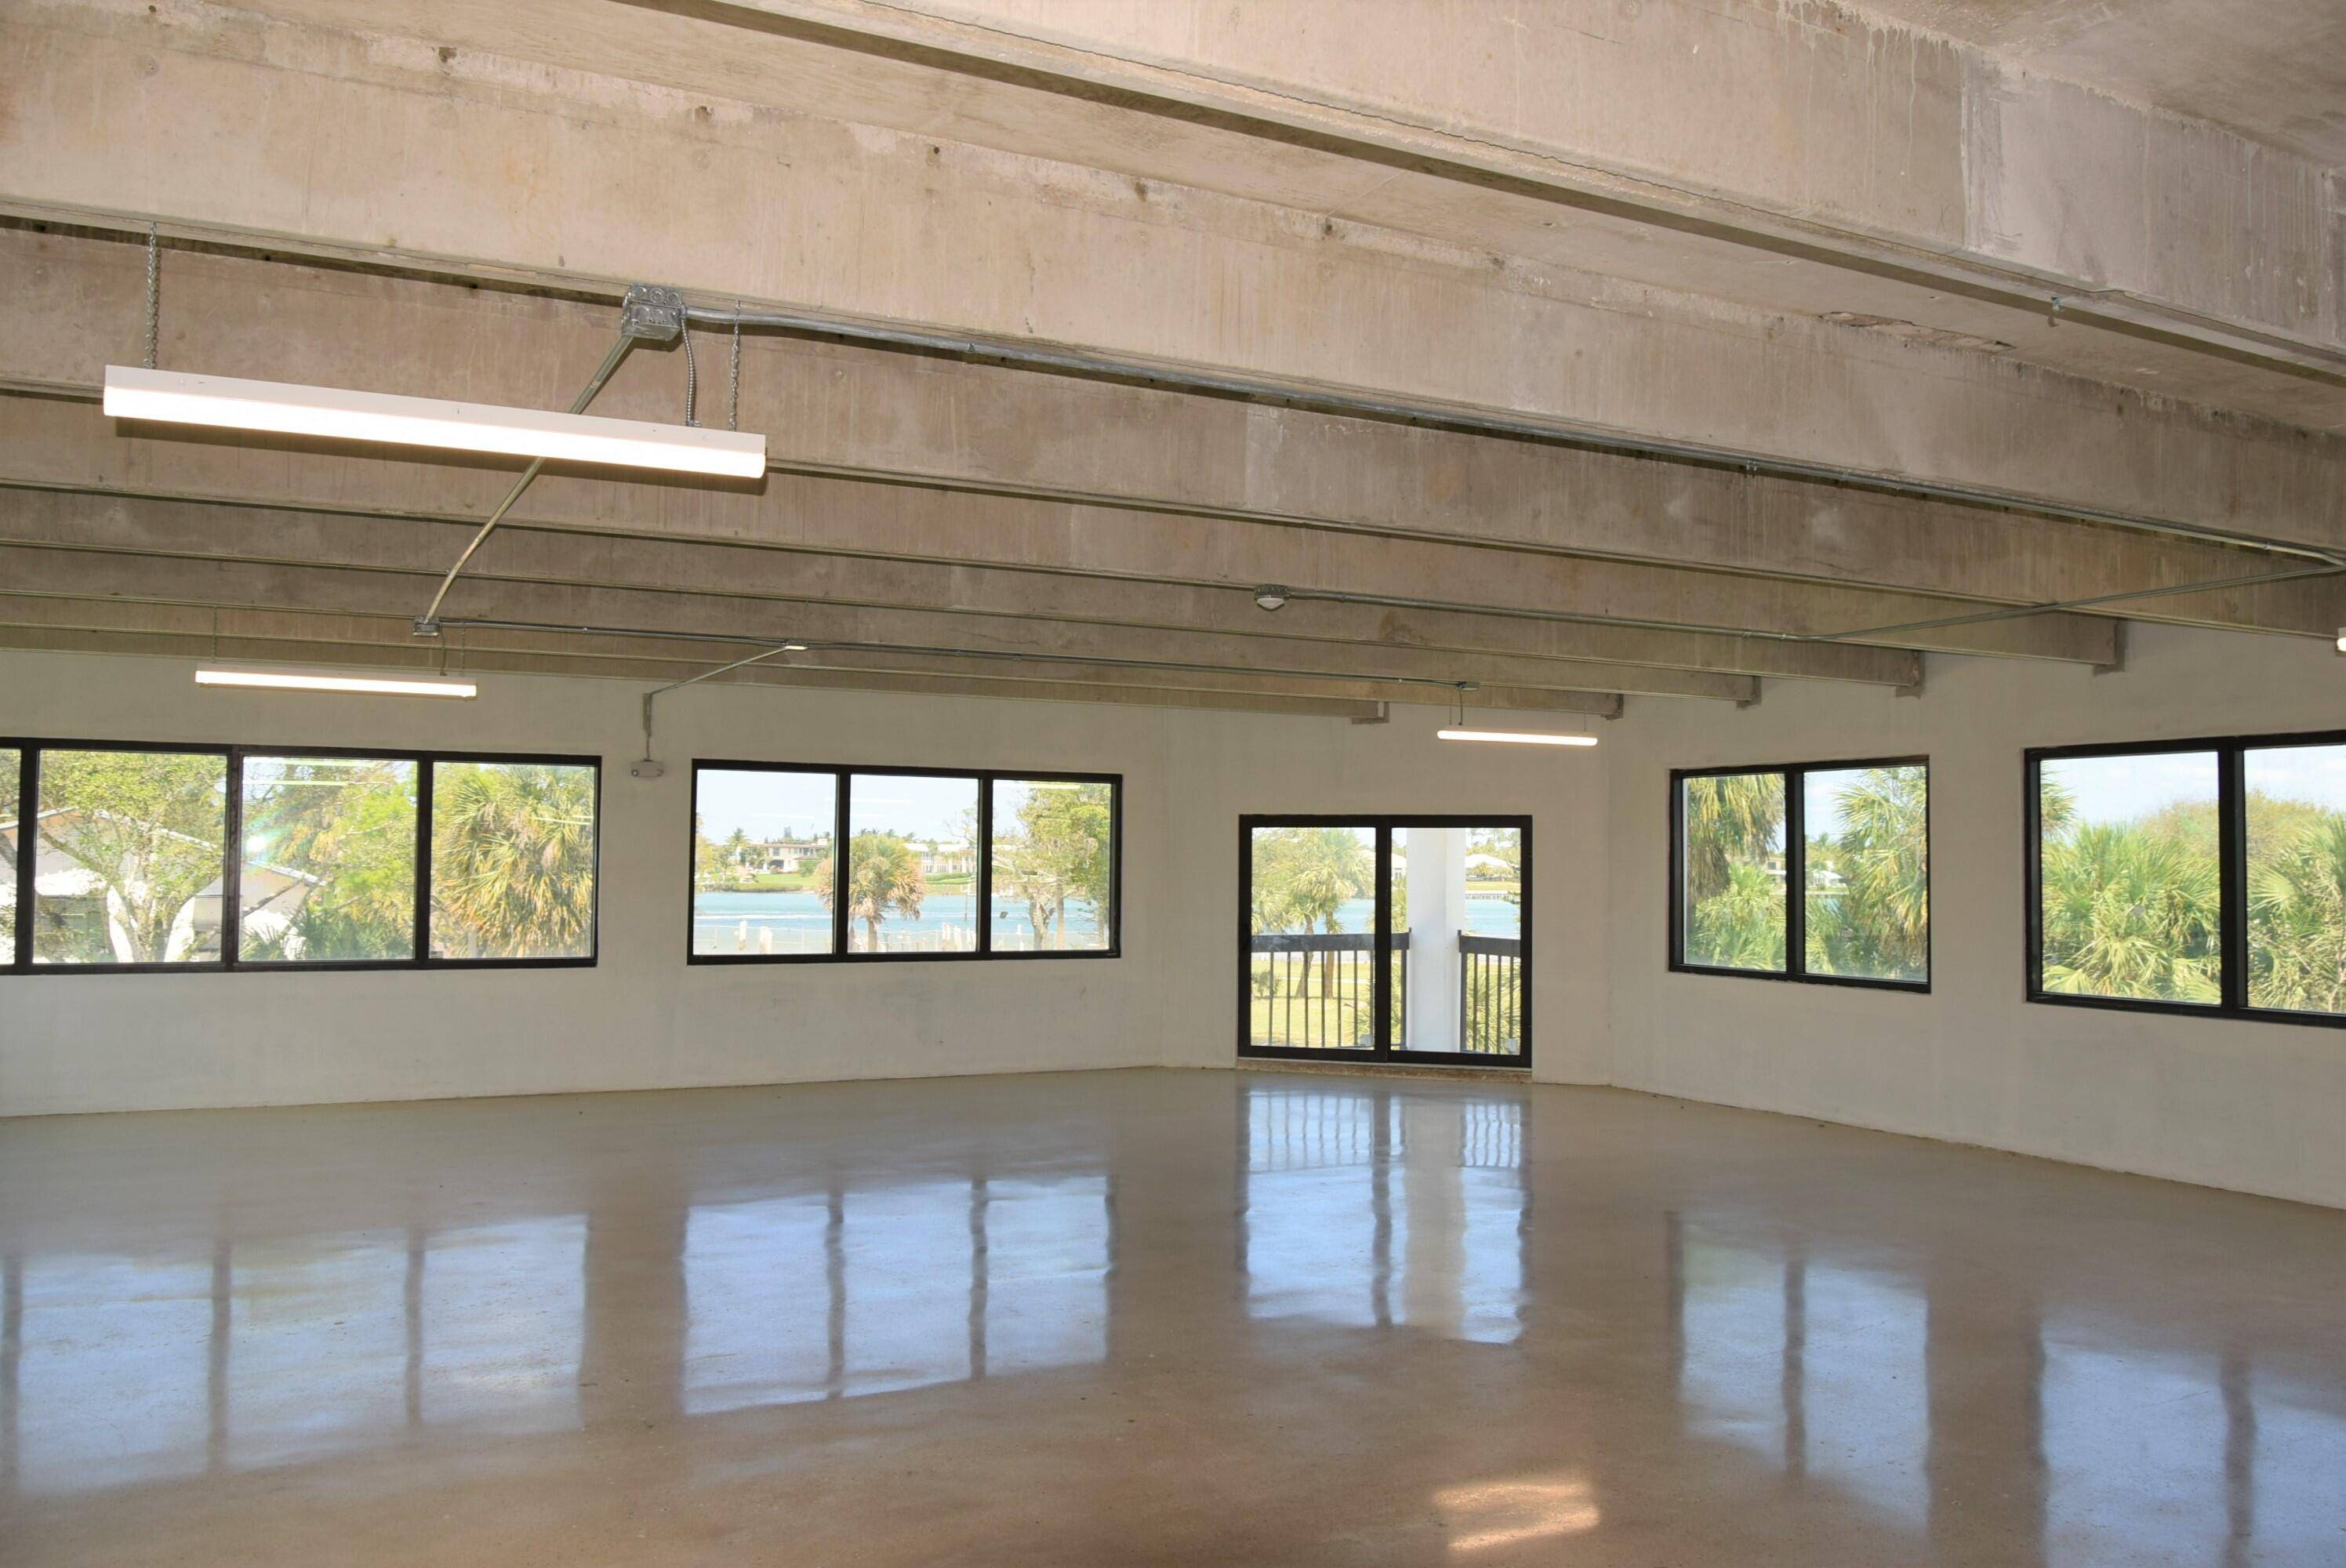 The second floor consists of 5, 232 SF of open office space with exposed 11' ceilings, polished concrete floors, and two bathrooms.